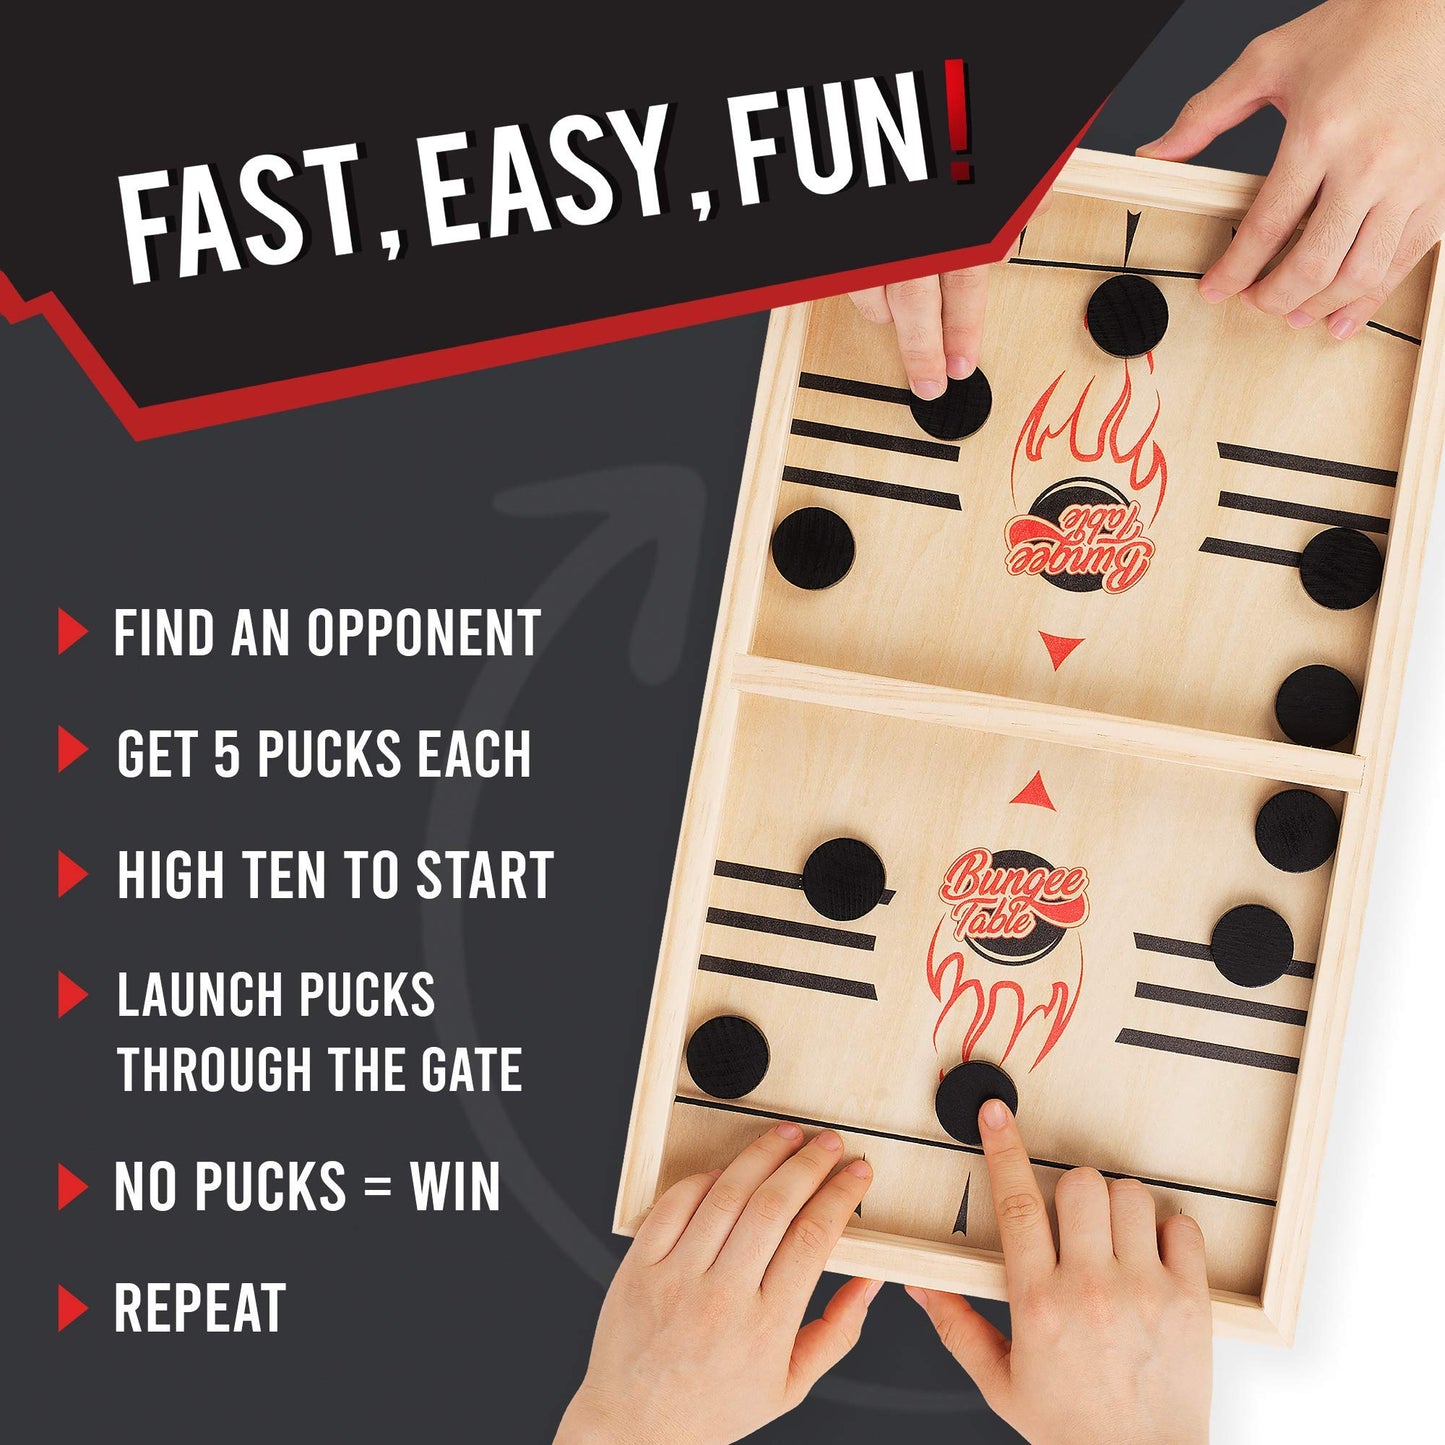 Bungee Table - Large Fast Sling Puck Game - Fast-Paced Fun for a Family Game Night or for a Party with Friends - Test Your Speed and Accuracy with This Wooden Hockey Board Game, 2 Players